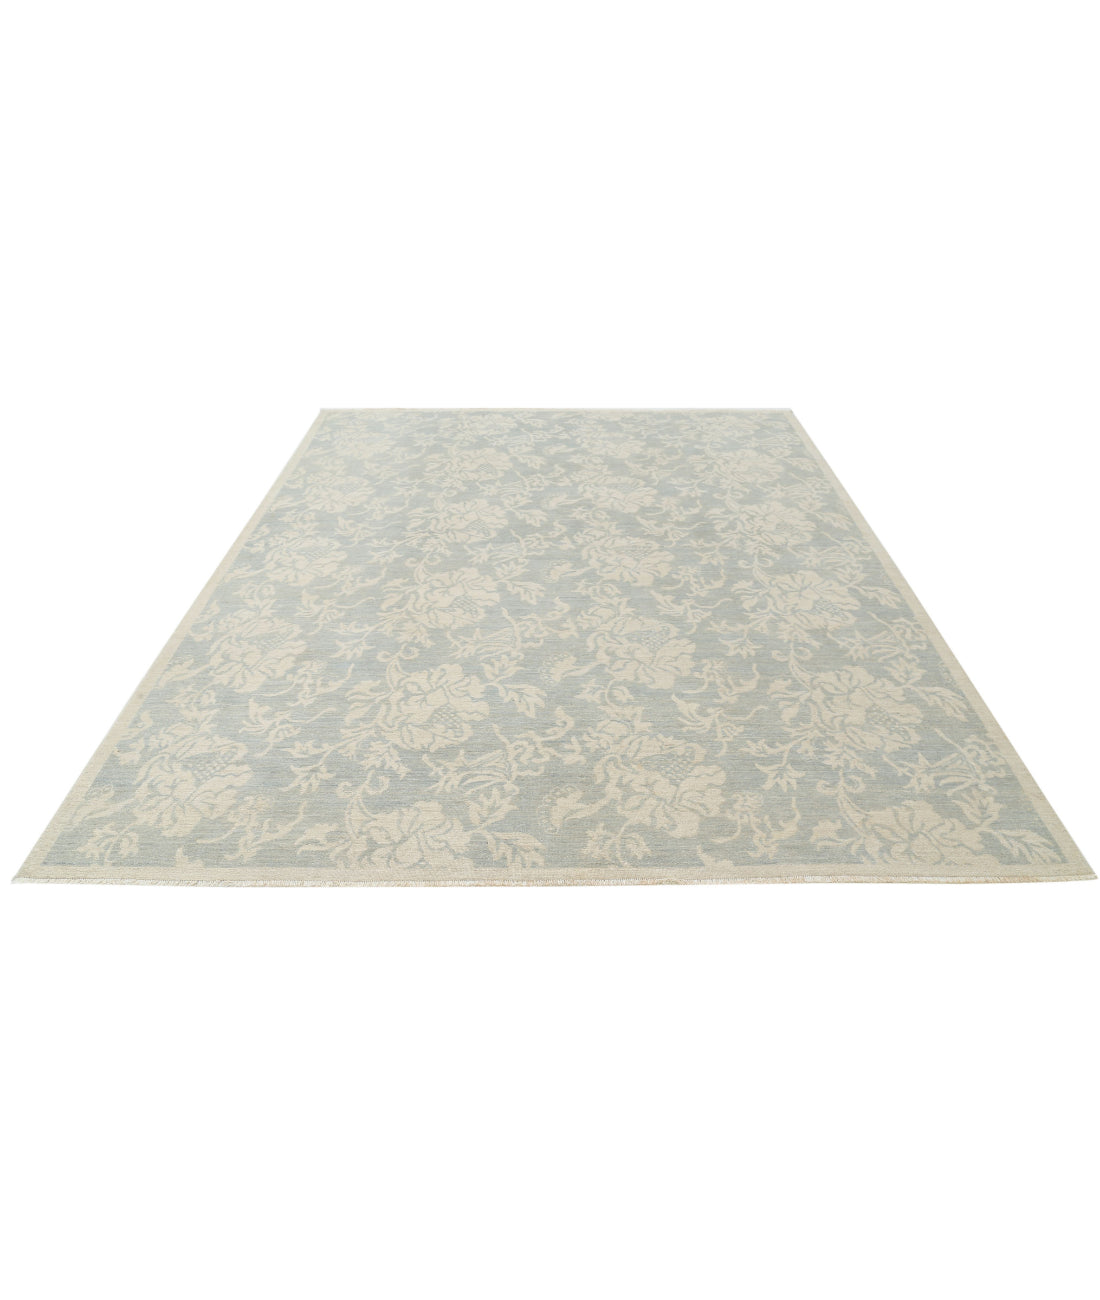 Hand Knotted Artemix Wool Rug - 8'1'' x 9'9'' 8'1'' x 9'9'' (243 X 293) / Grey / Ivory